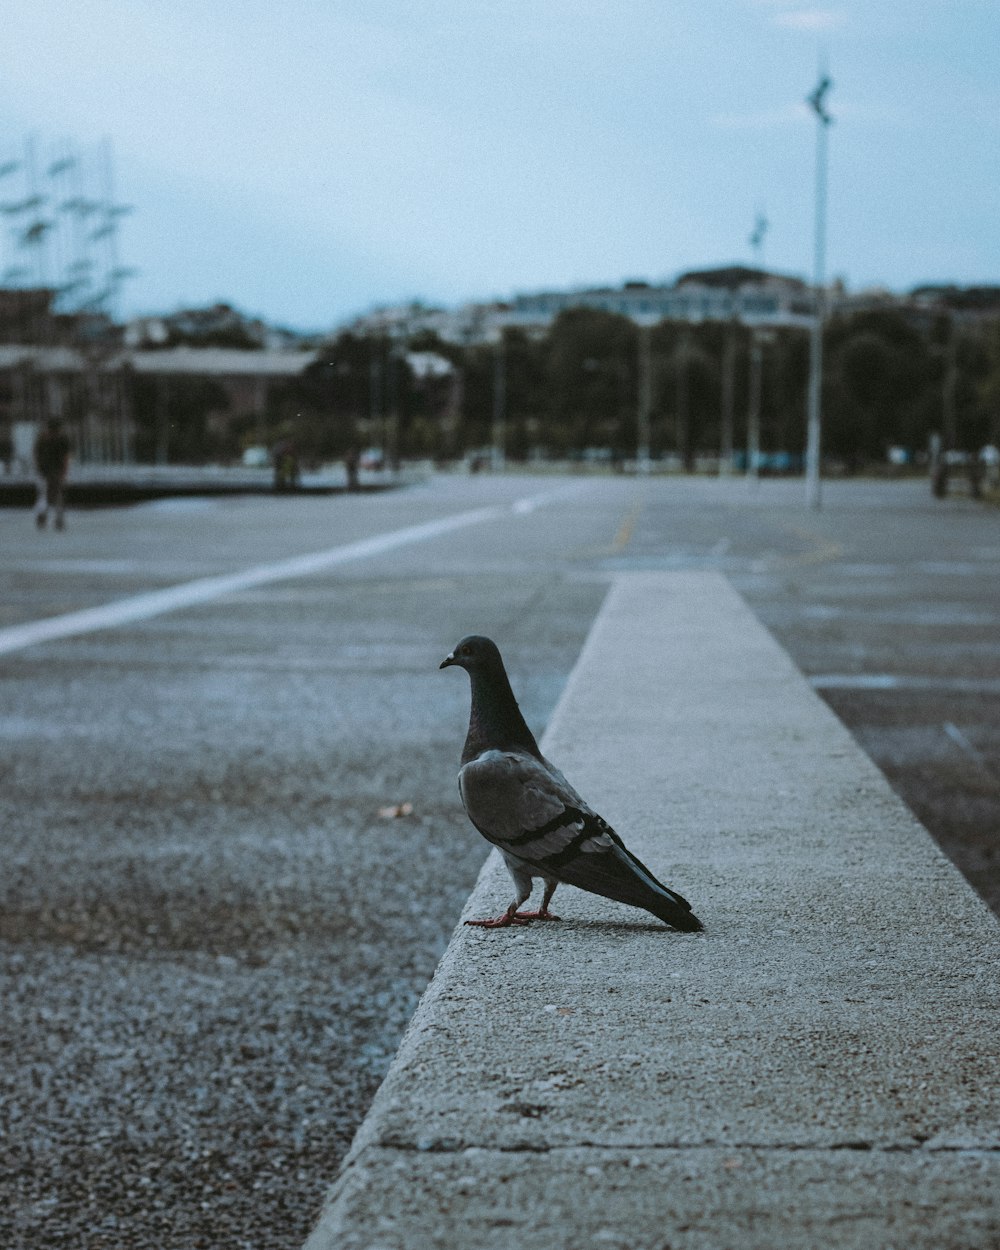 a pigeon sitting on the side of a road